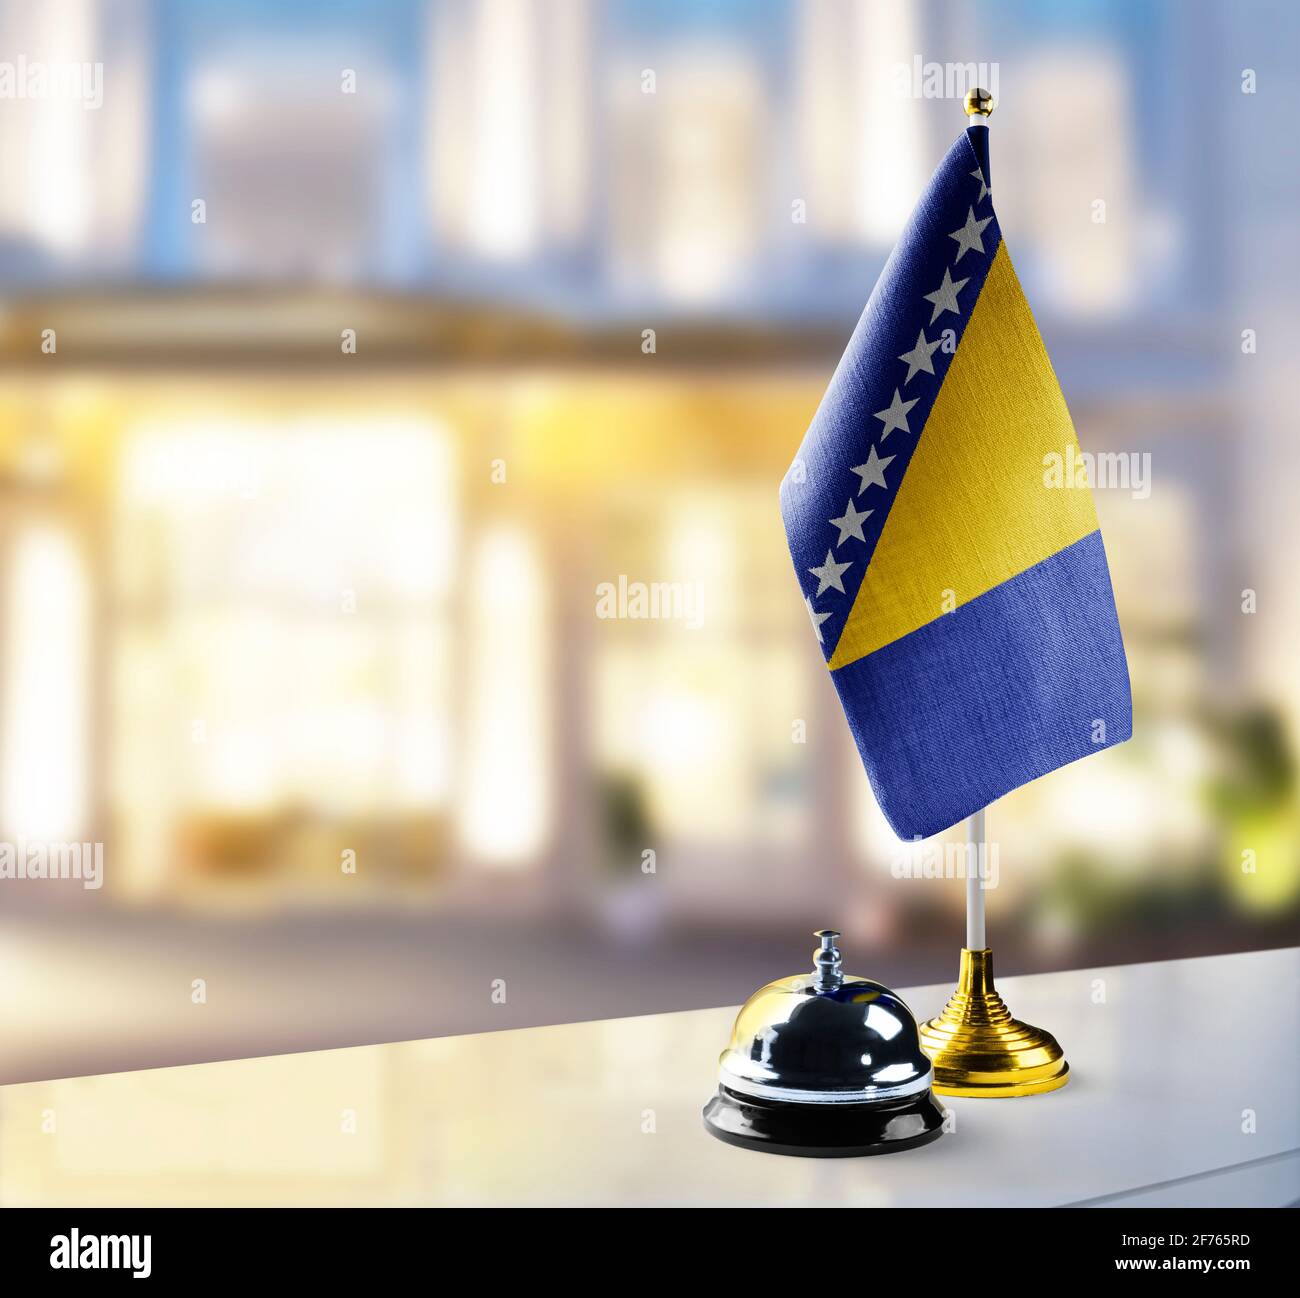 Bosnia and Herzegovina flag on the reception desk in the lobby of the hotel Stock Photo